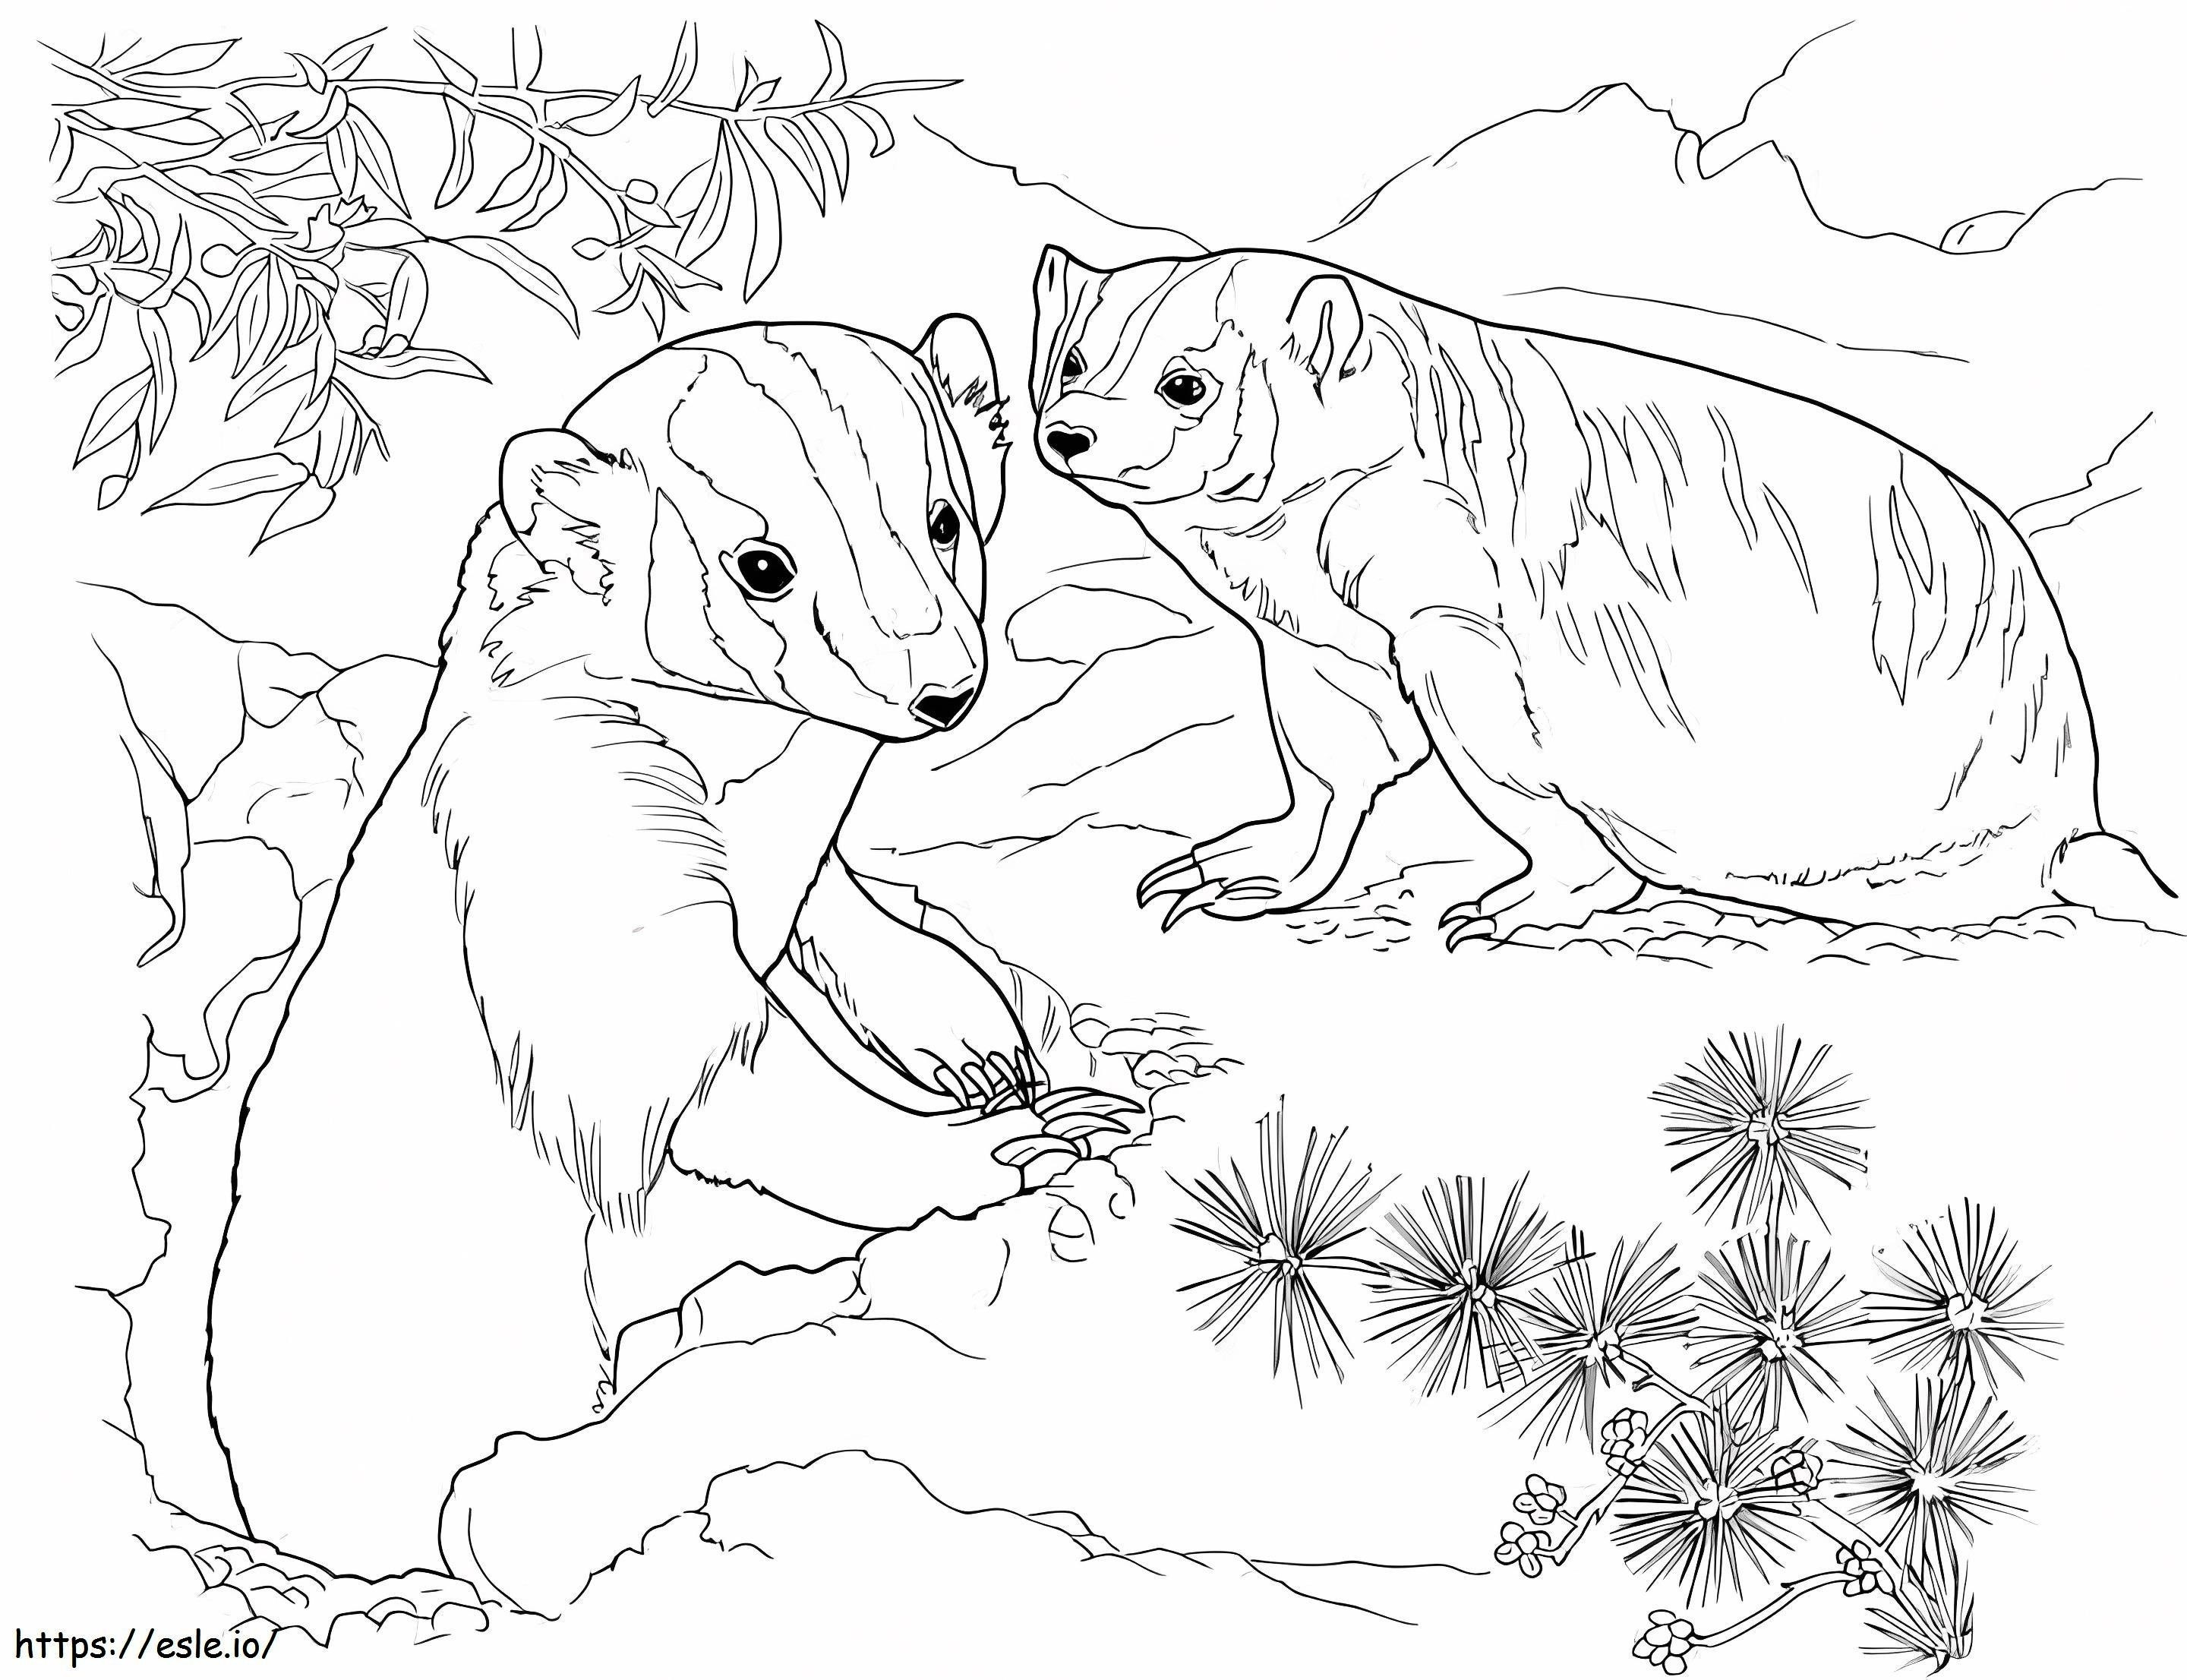 Two Badgers In The Jungle coloring page